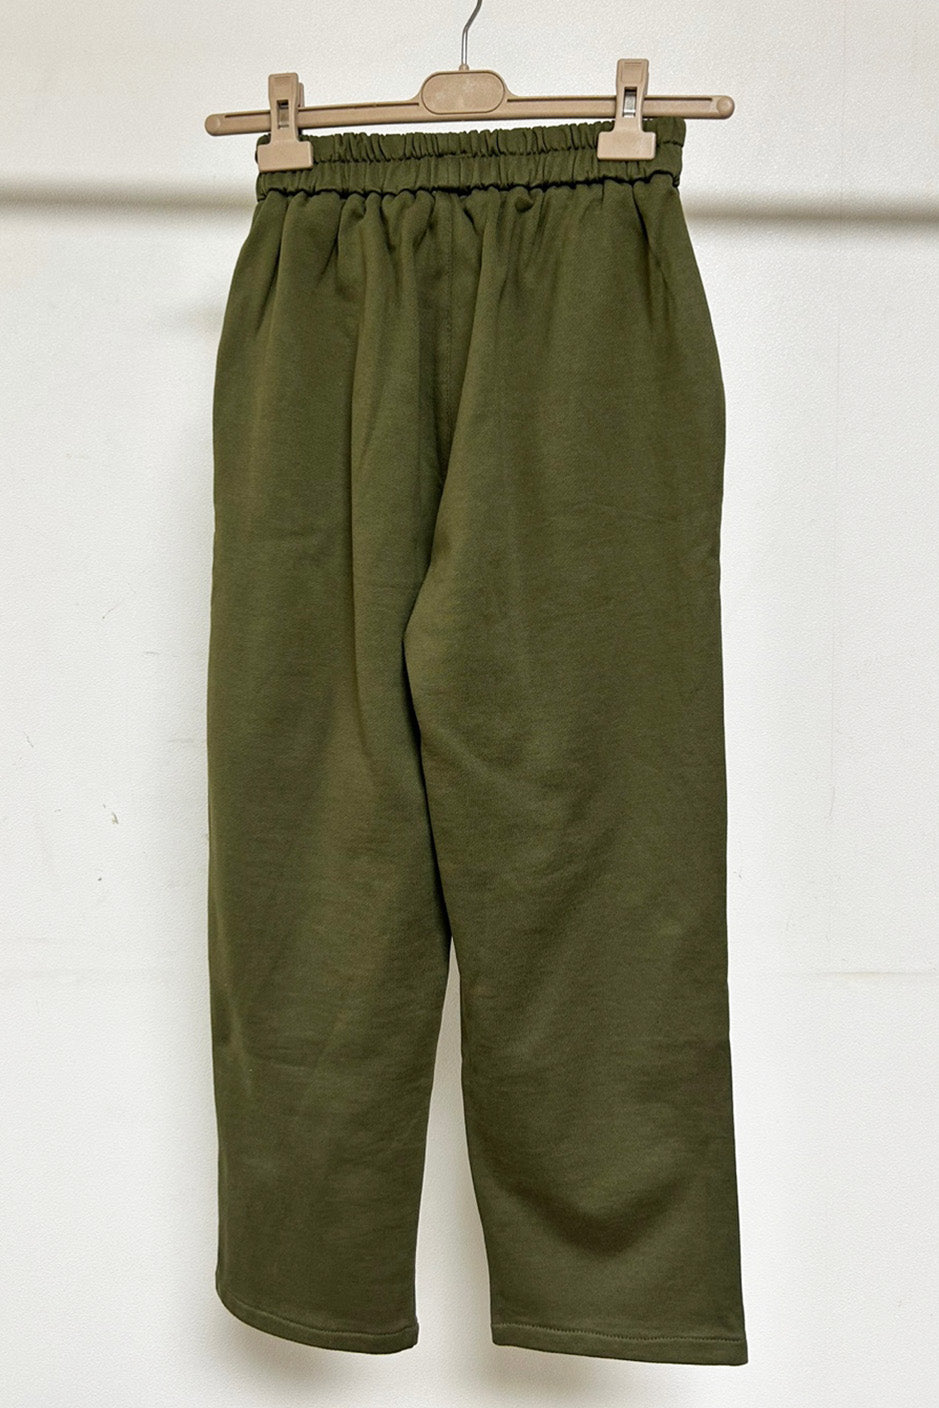 Comfy travel pants for women